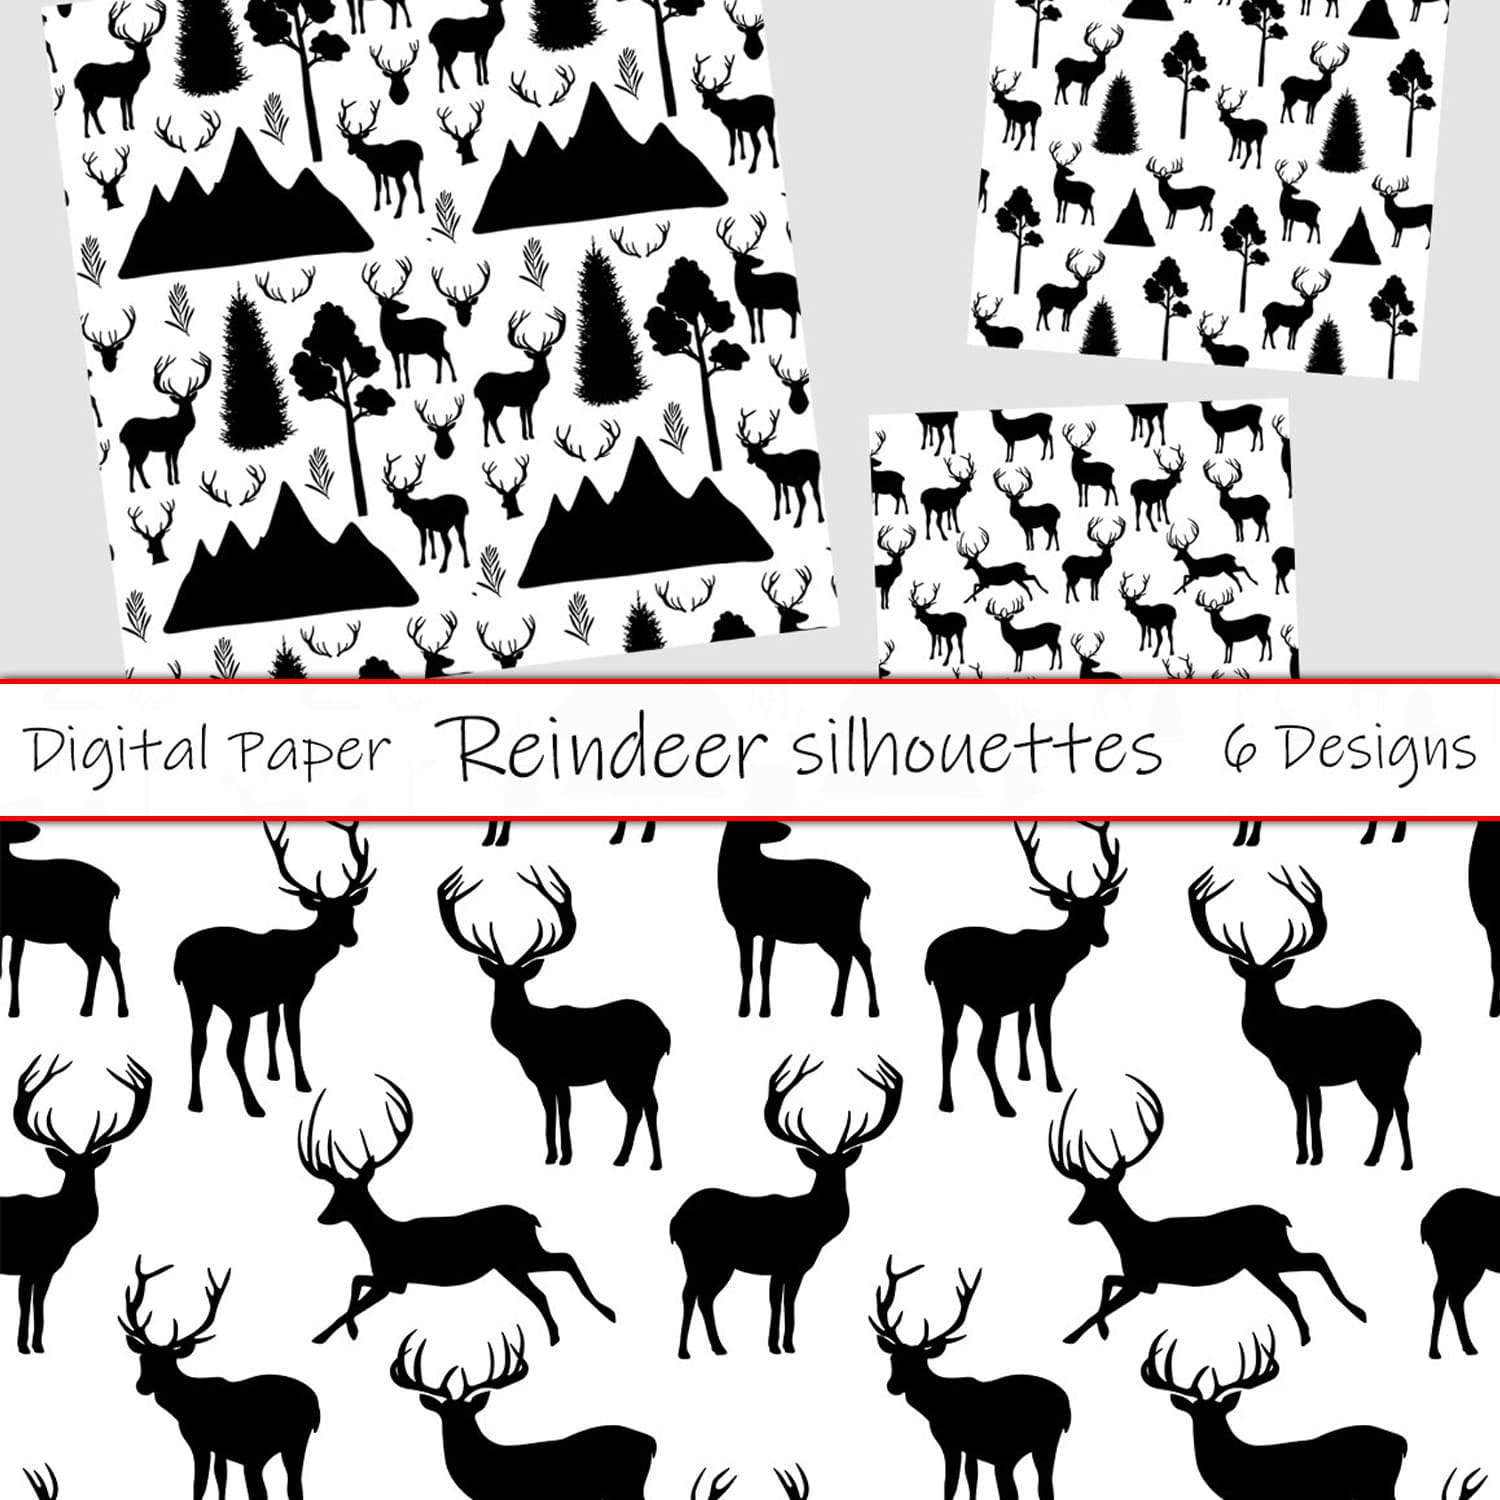 Reindeer silhouettes pattern cover.